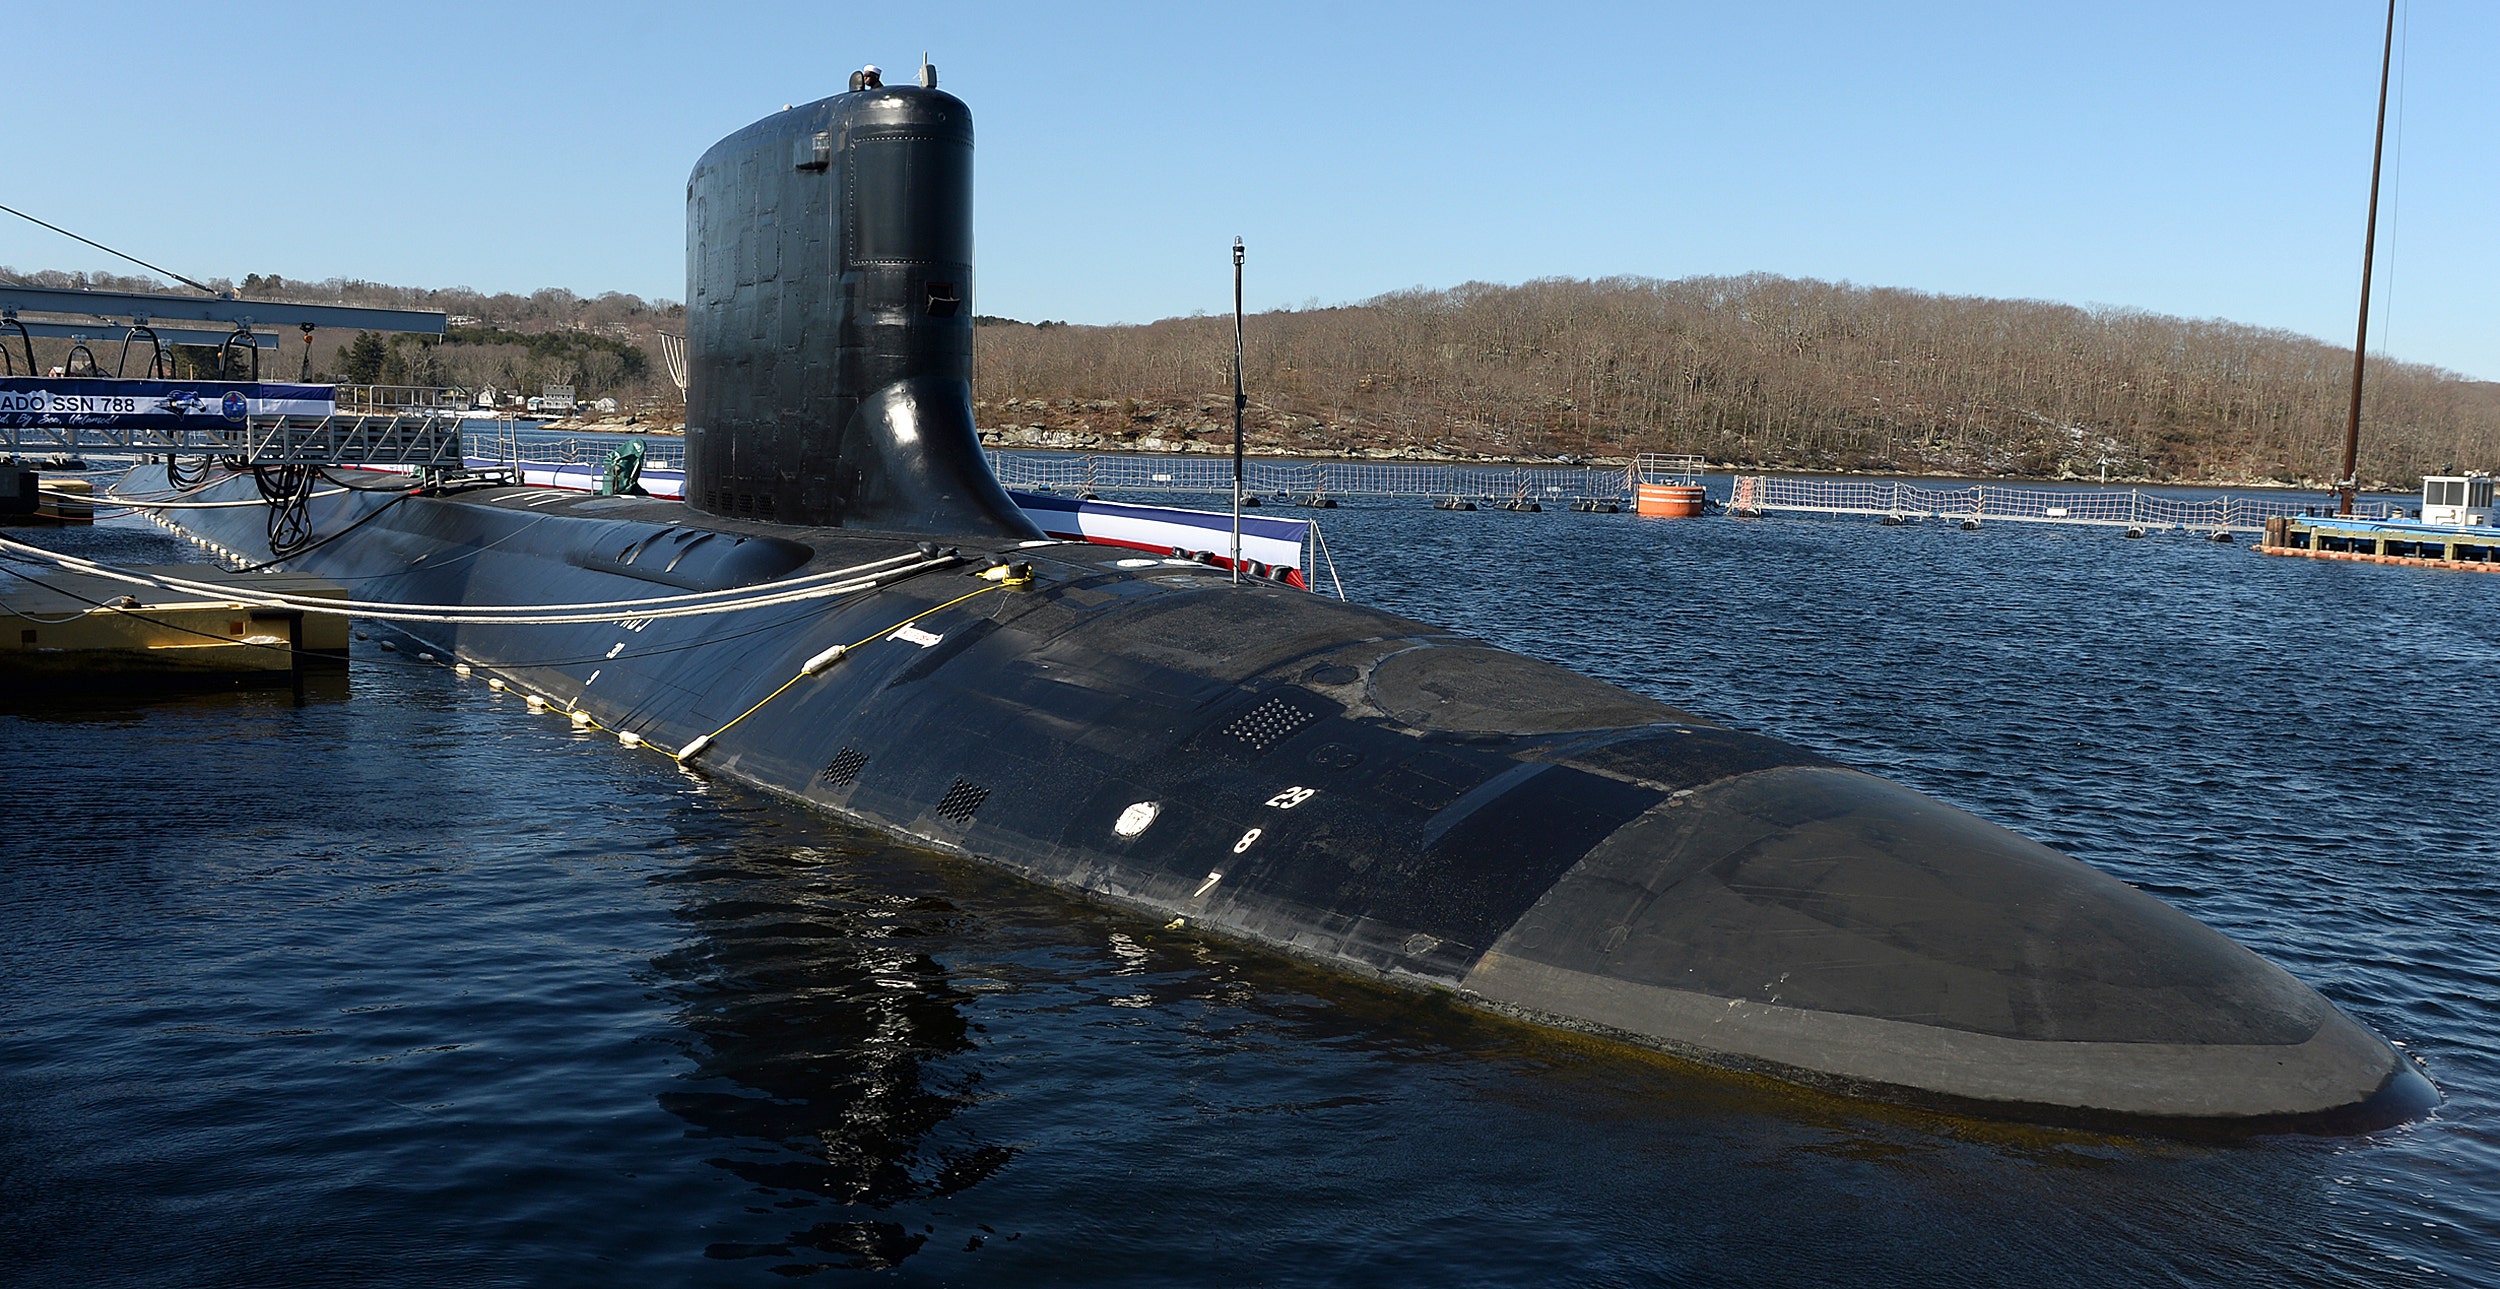 Australia on path to a nuclear submarine program by 2030s with US, UK help